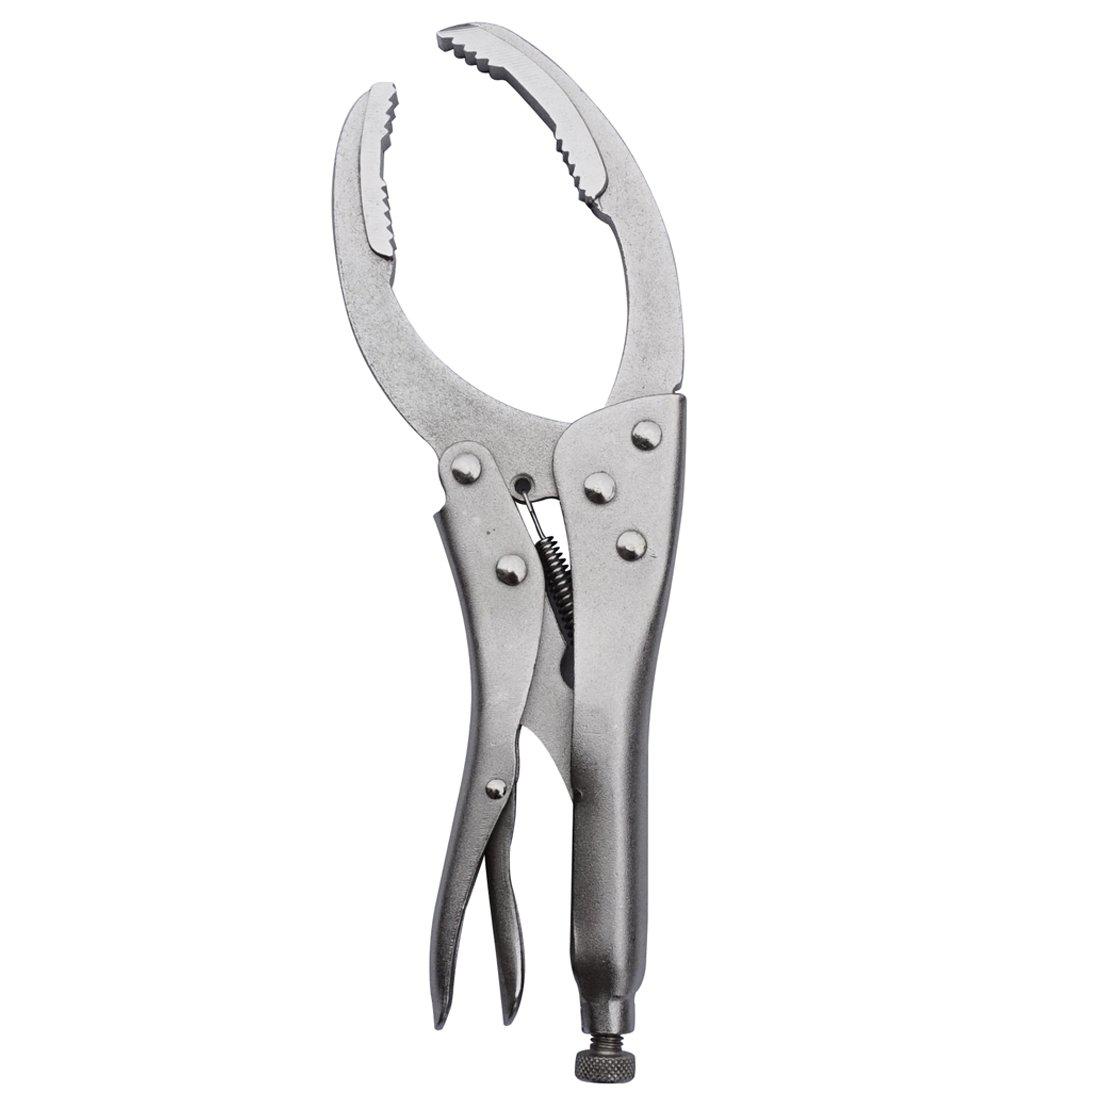 macwork locking grip oil filter wrench pliers?vise style for filters shapes 9.5in./240mm ?remover wrench tool ?holding grippi